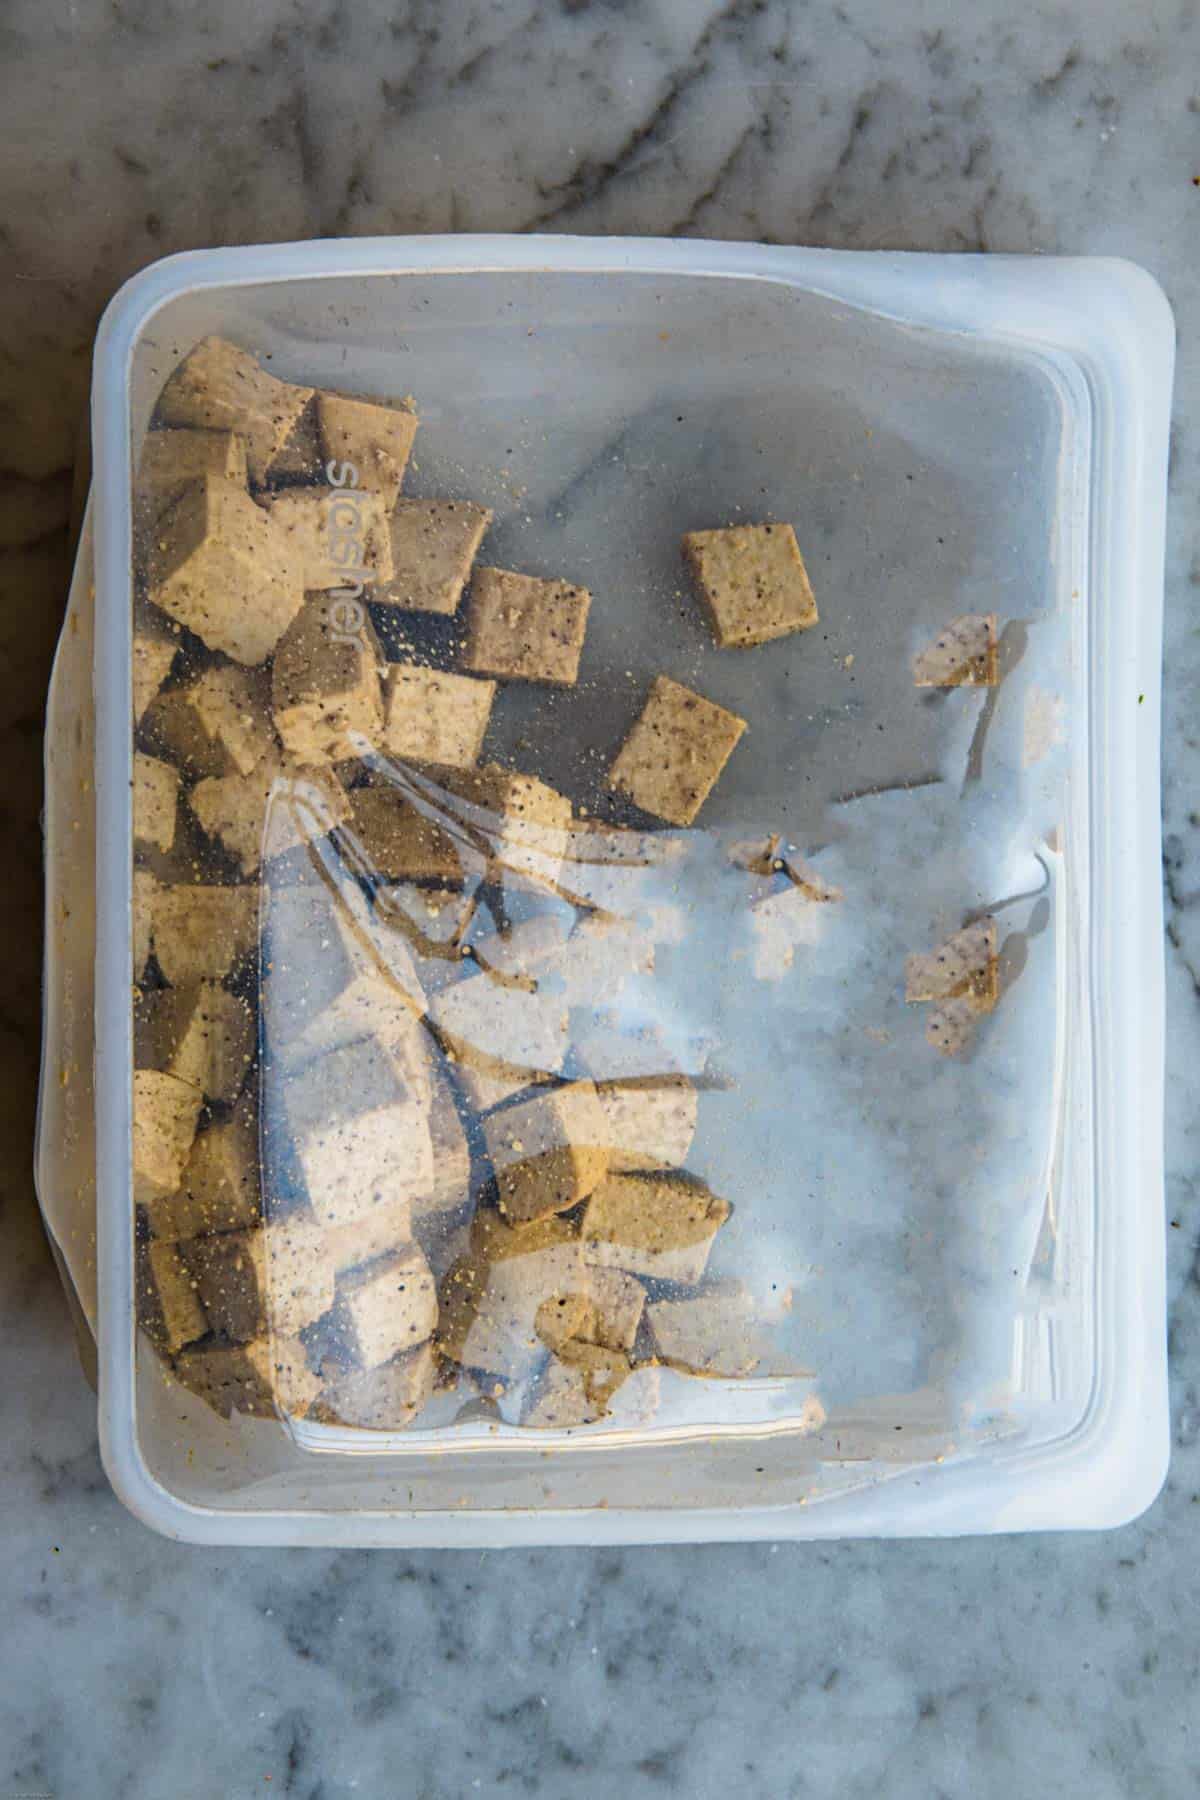 Tofu cubes with cornstarch, and seasoning in a reusable silicone bag for marinating.